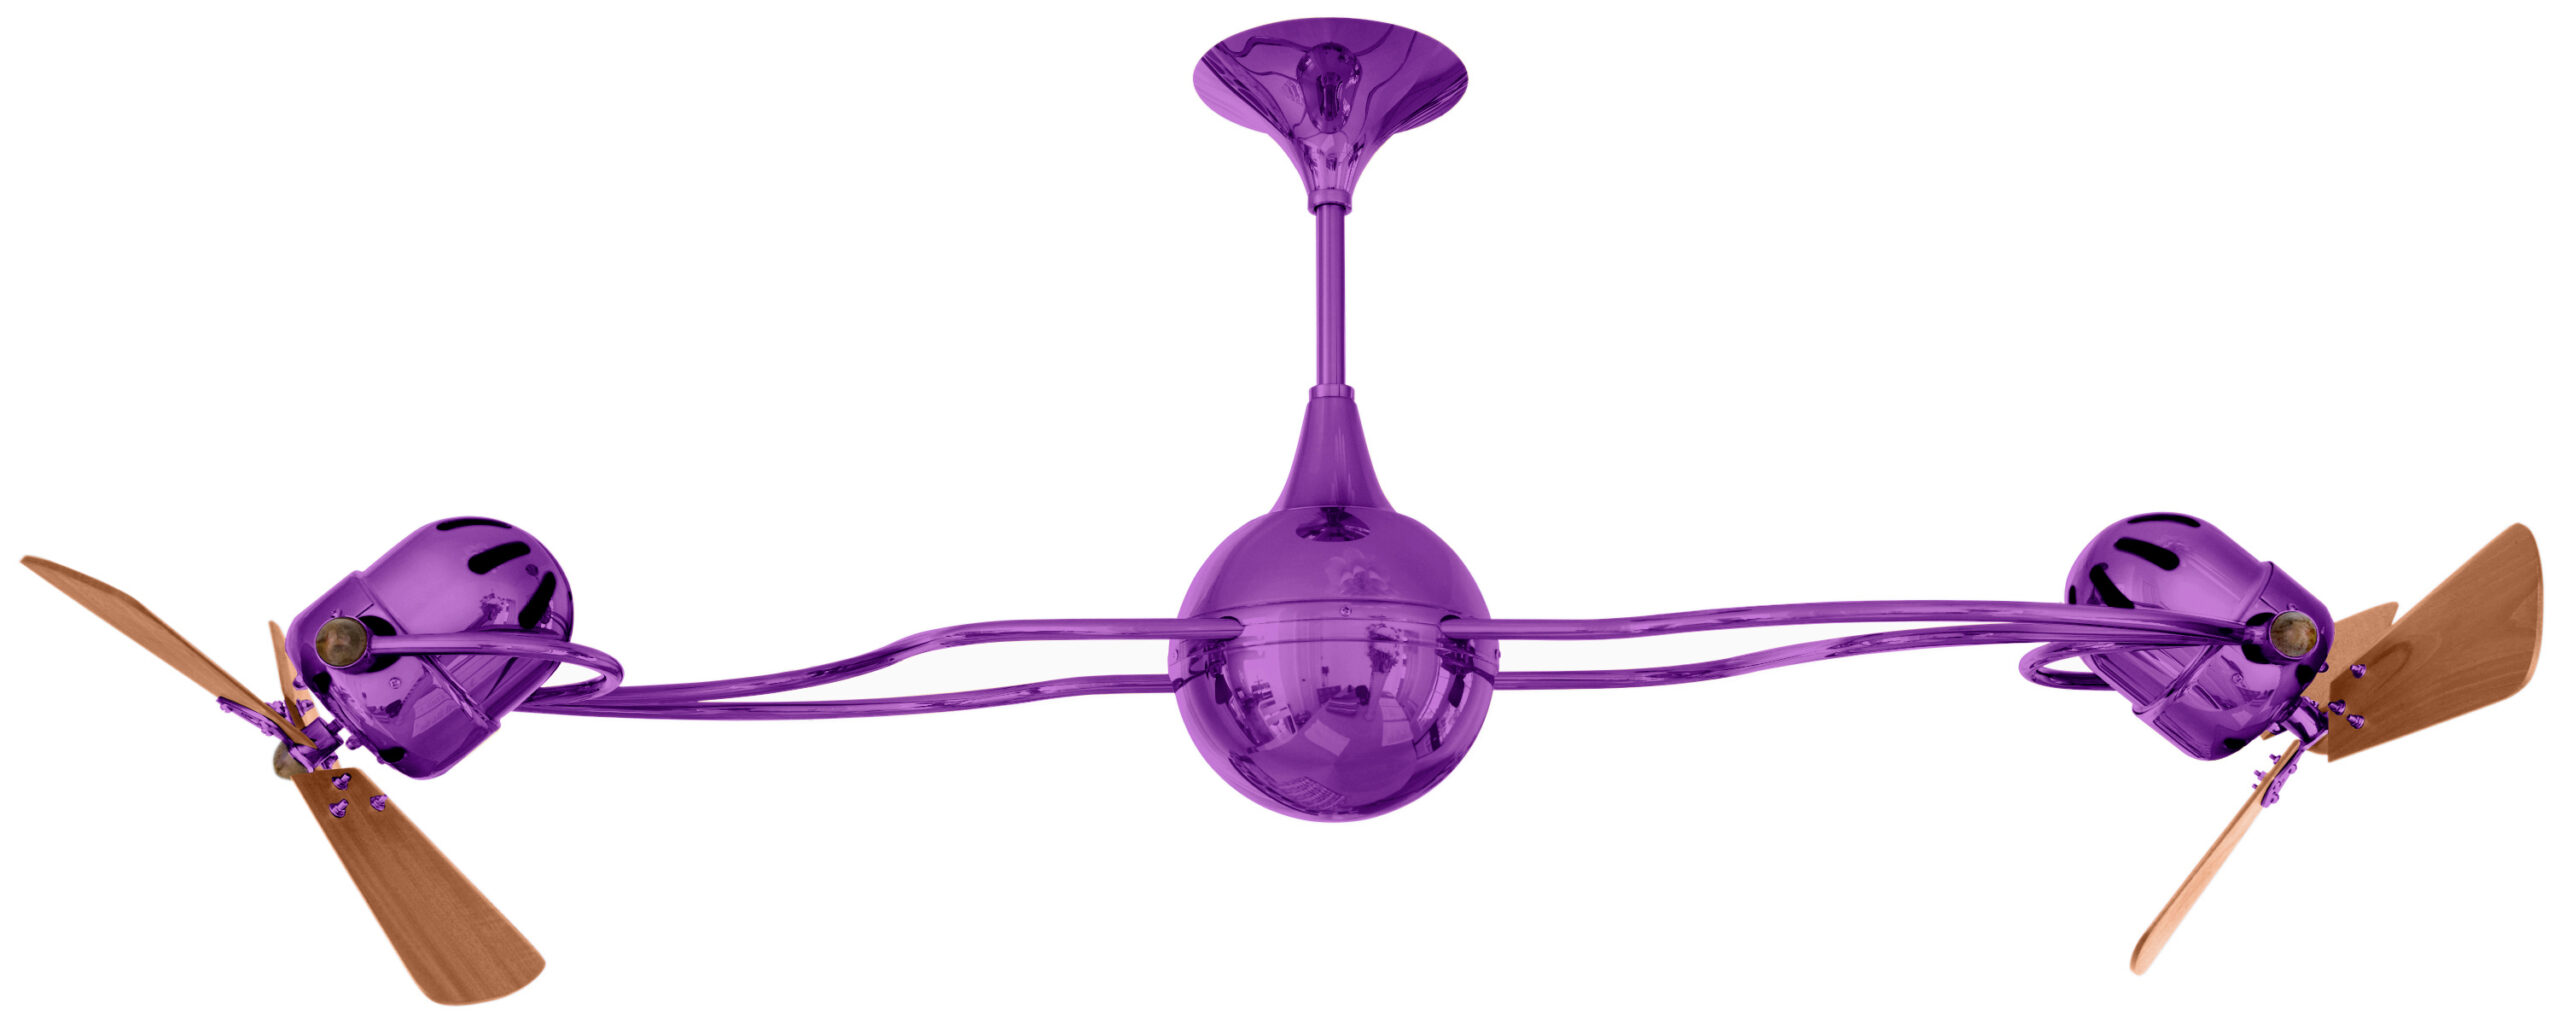 Italo Ventania rotational dual head ceiling fan in Light Purple / Ametista finish with solid mahogany wood blades made by Matthews Fan Company.